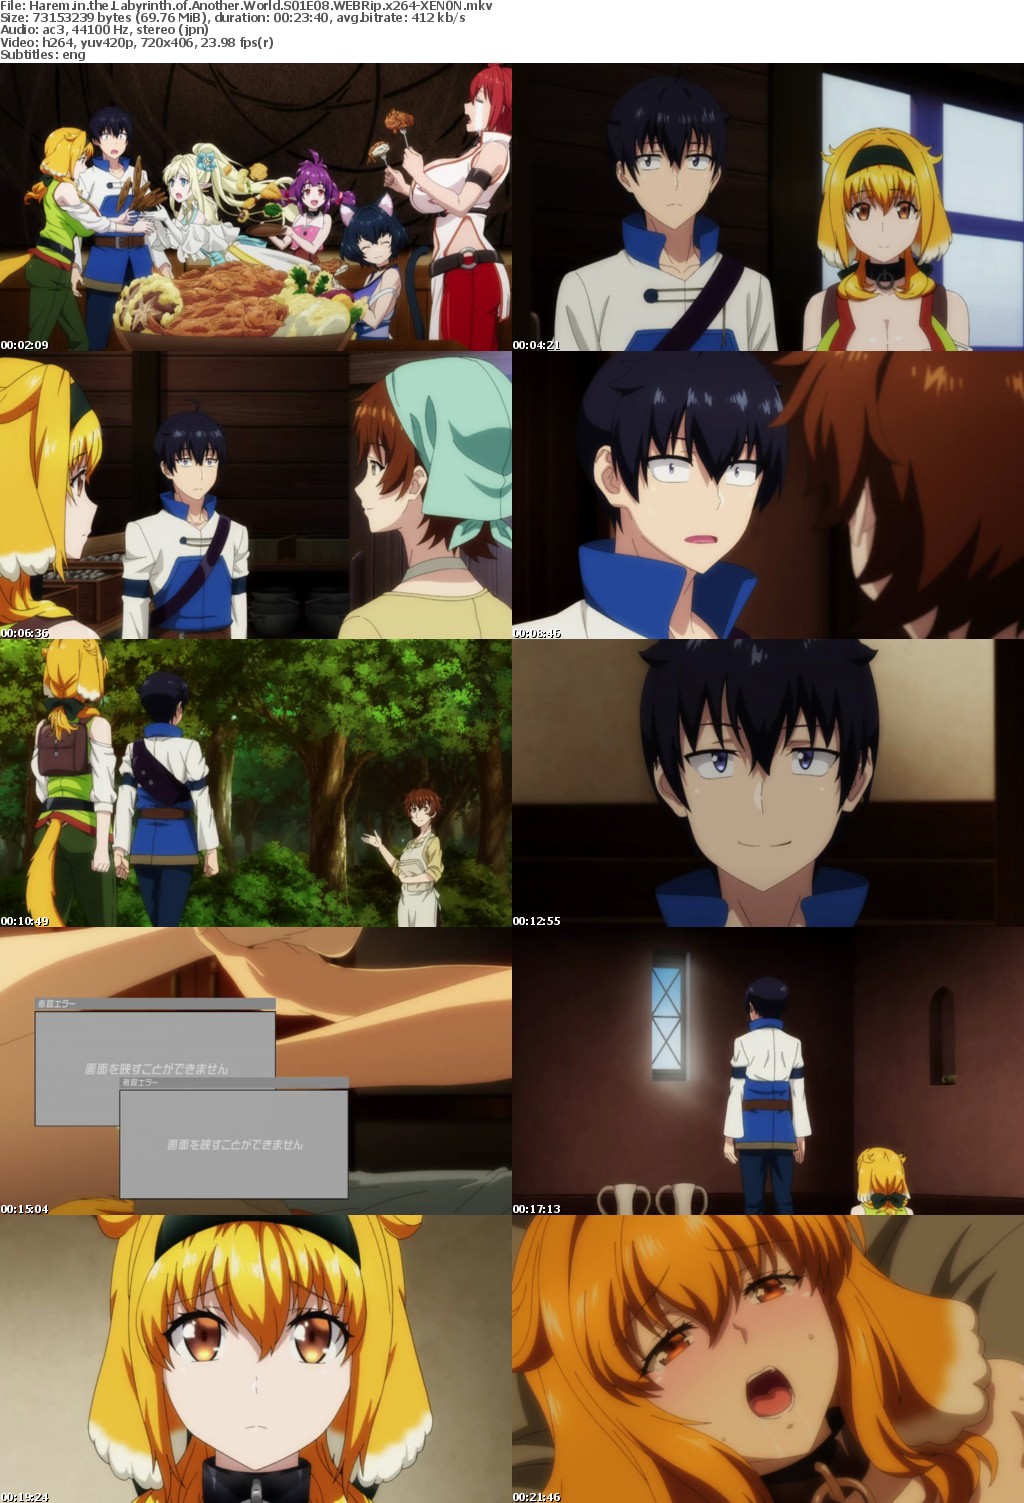 Harem in the Labyrinth of Another World S01E08 WEBRip x264-XEN0N